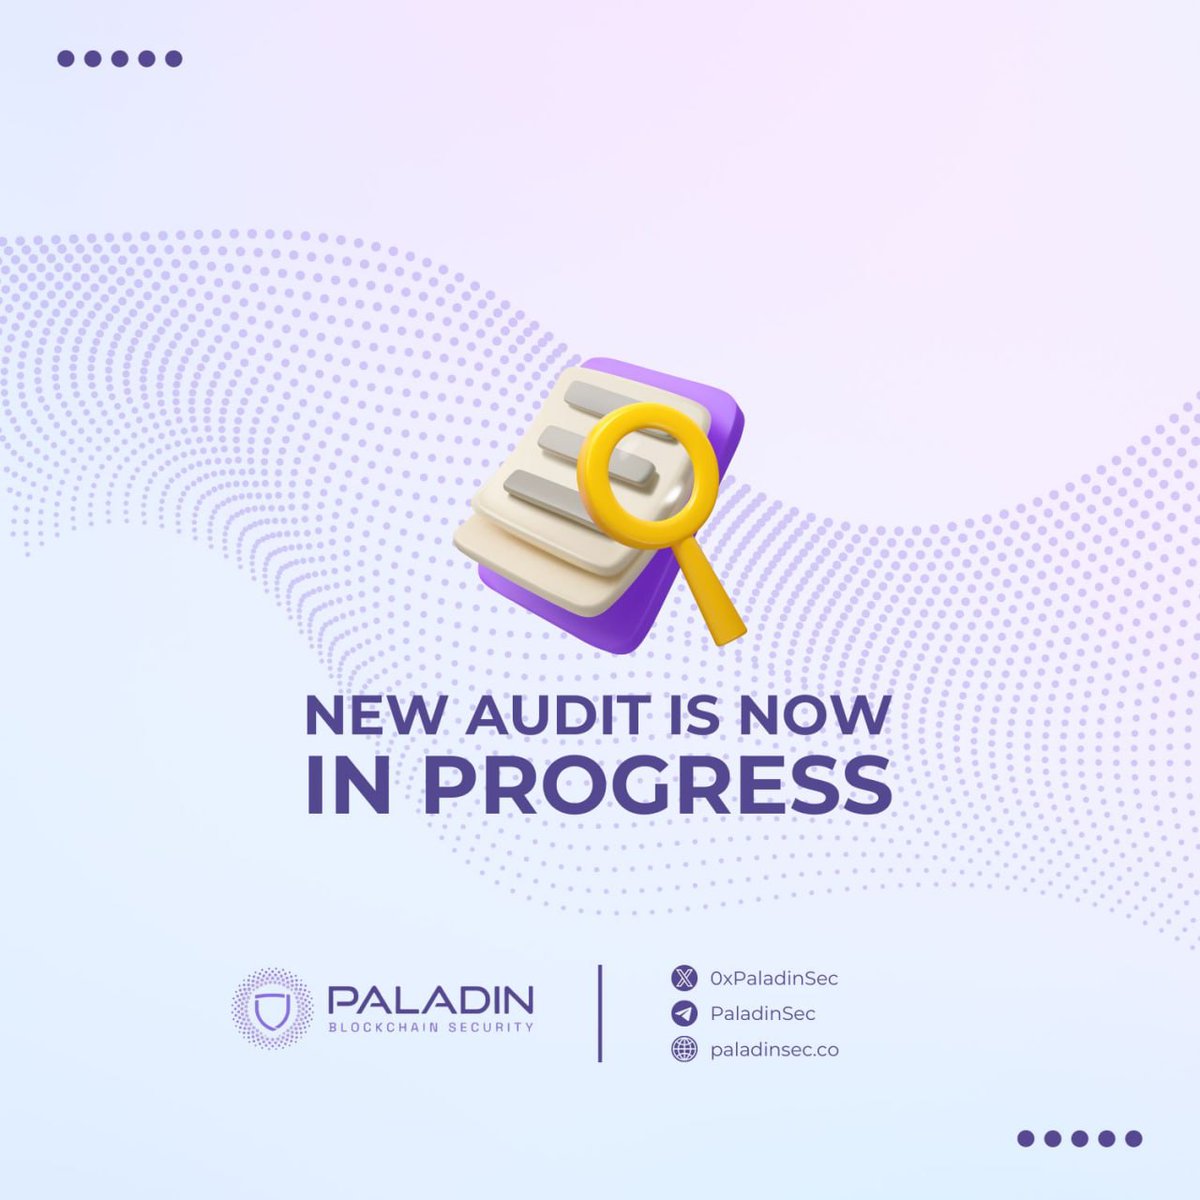 We are delighted to share that Paladin has officially commenced the audit of contracts for MBD Financial @mbdfinancials Stay tuned for progress updates! #cryptocurrency #audit #blockchainsecurity